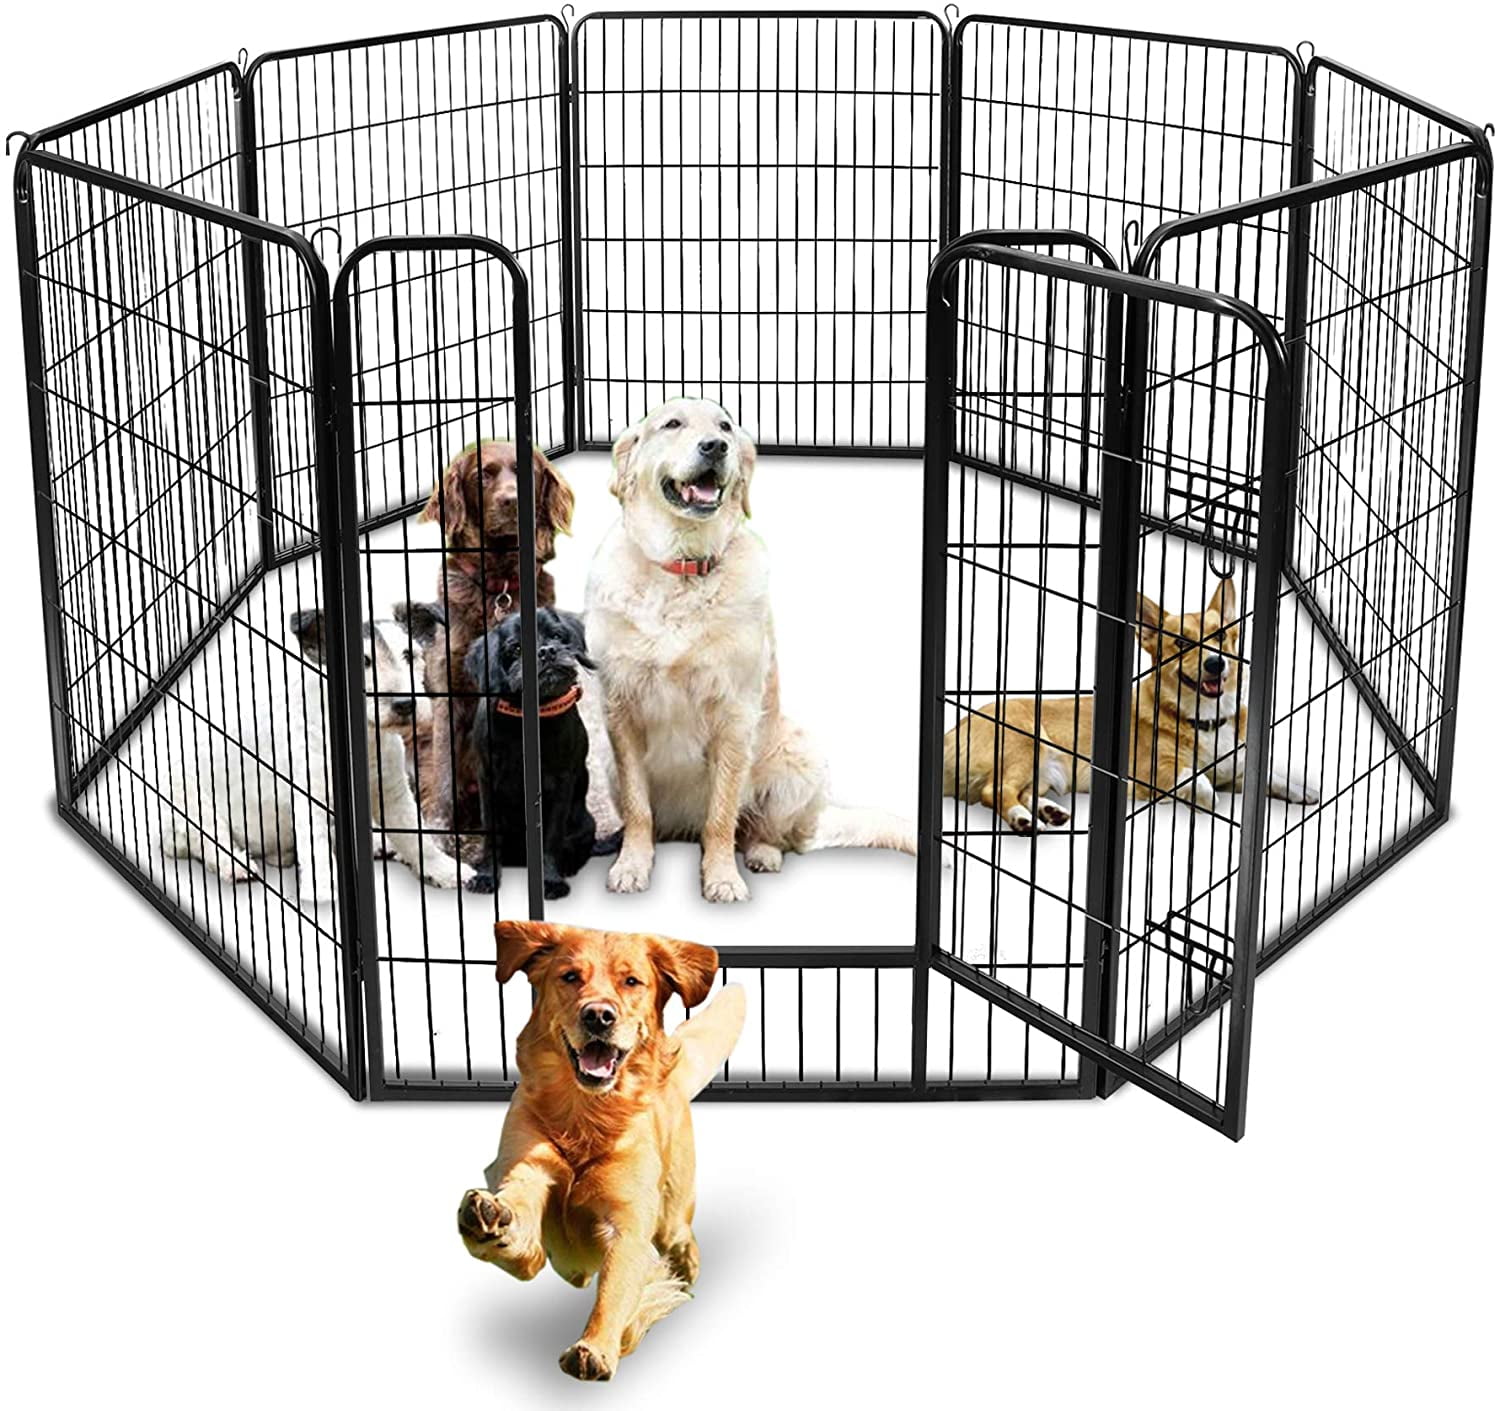 Small Pet Playpen Indoor Outdoor Dog Cat Exercise Portable Cage Kennel Fence NEW 